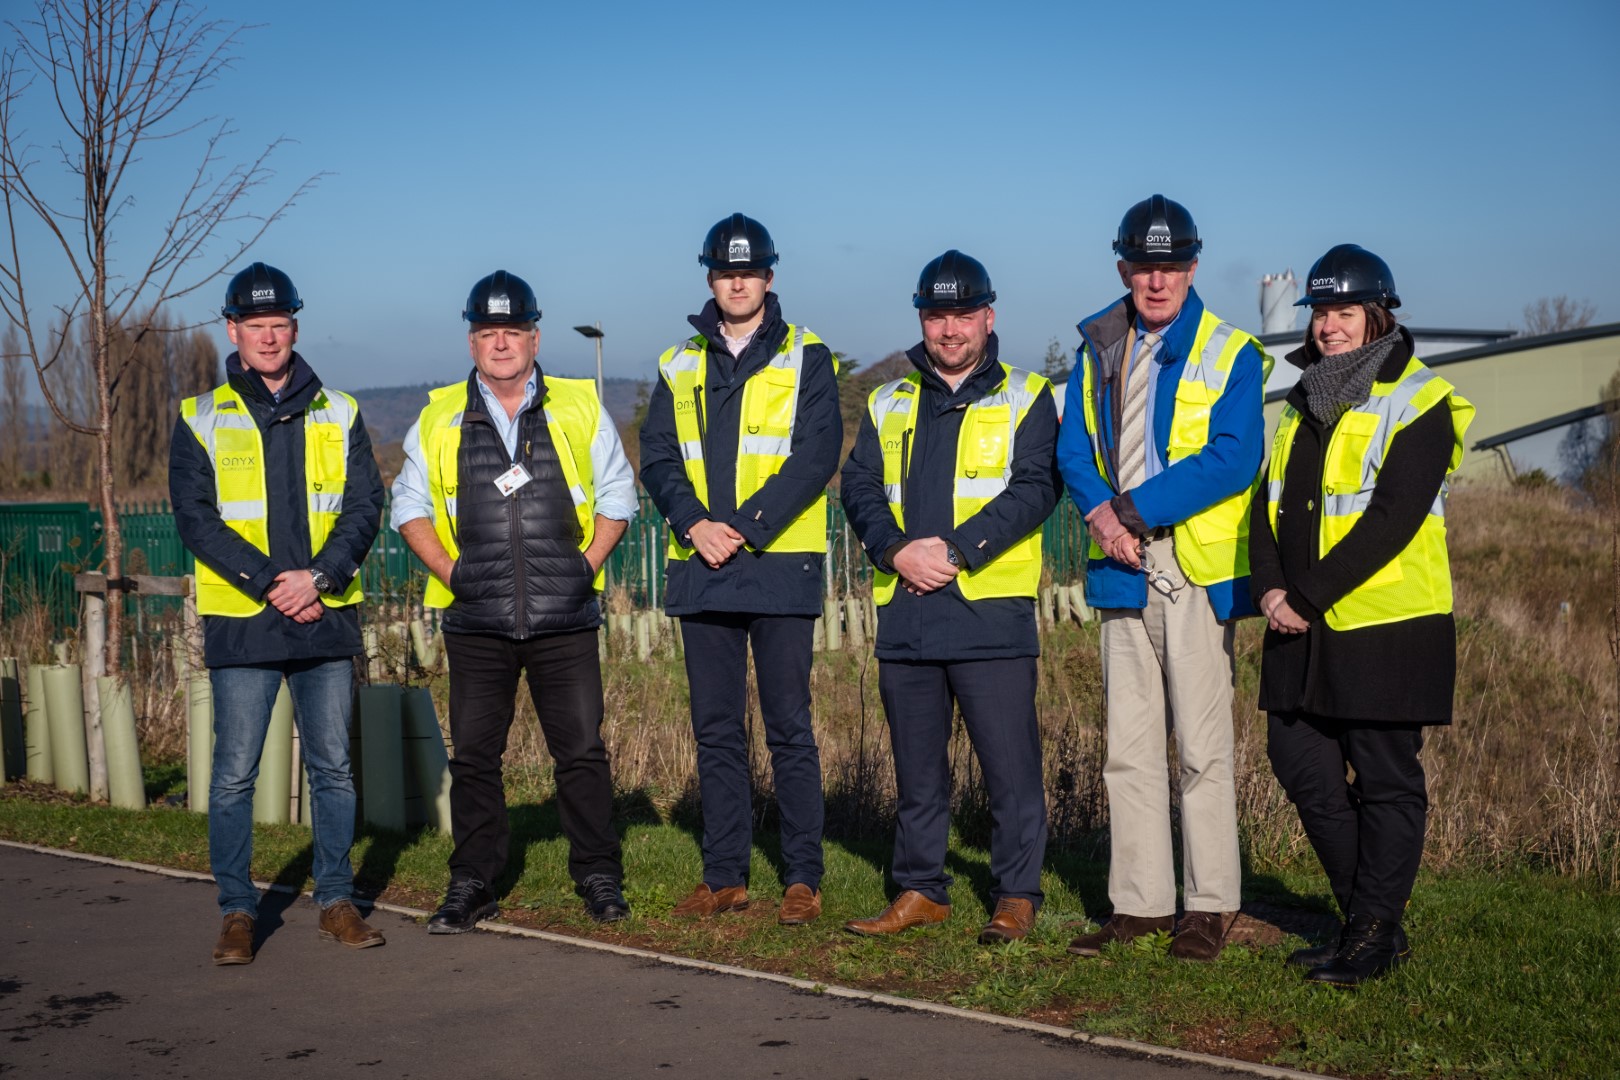 East Devon District Council, Devon County Council key stakeholders with the Onyx team at the new Skypark site